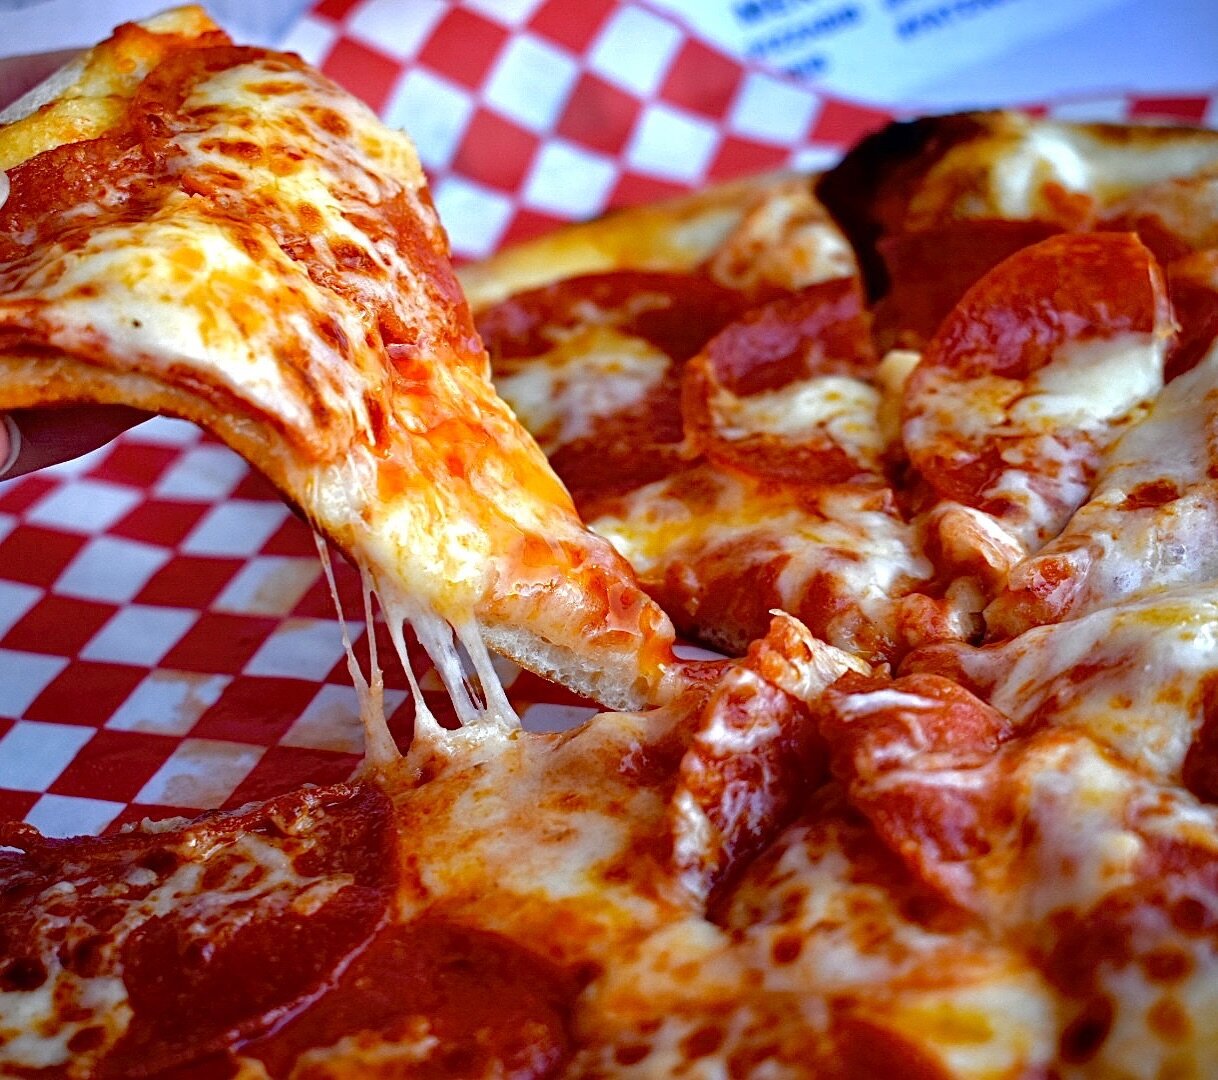 I&rsquo;ll have #pepperoni, please! 🙋&zwj;♀️ How about you? #happyfridayeveryone #treatyourself 

fatzachspizza.com
.
.
.
.
#eatlocal #smallbusiness #downtown #smallbusiness #puyallup #pnw #pizza #yummy #instagood  #food #foodporn #catering #mobile 